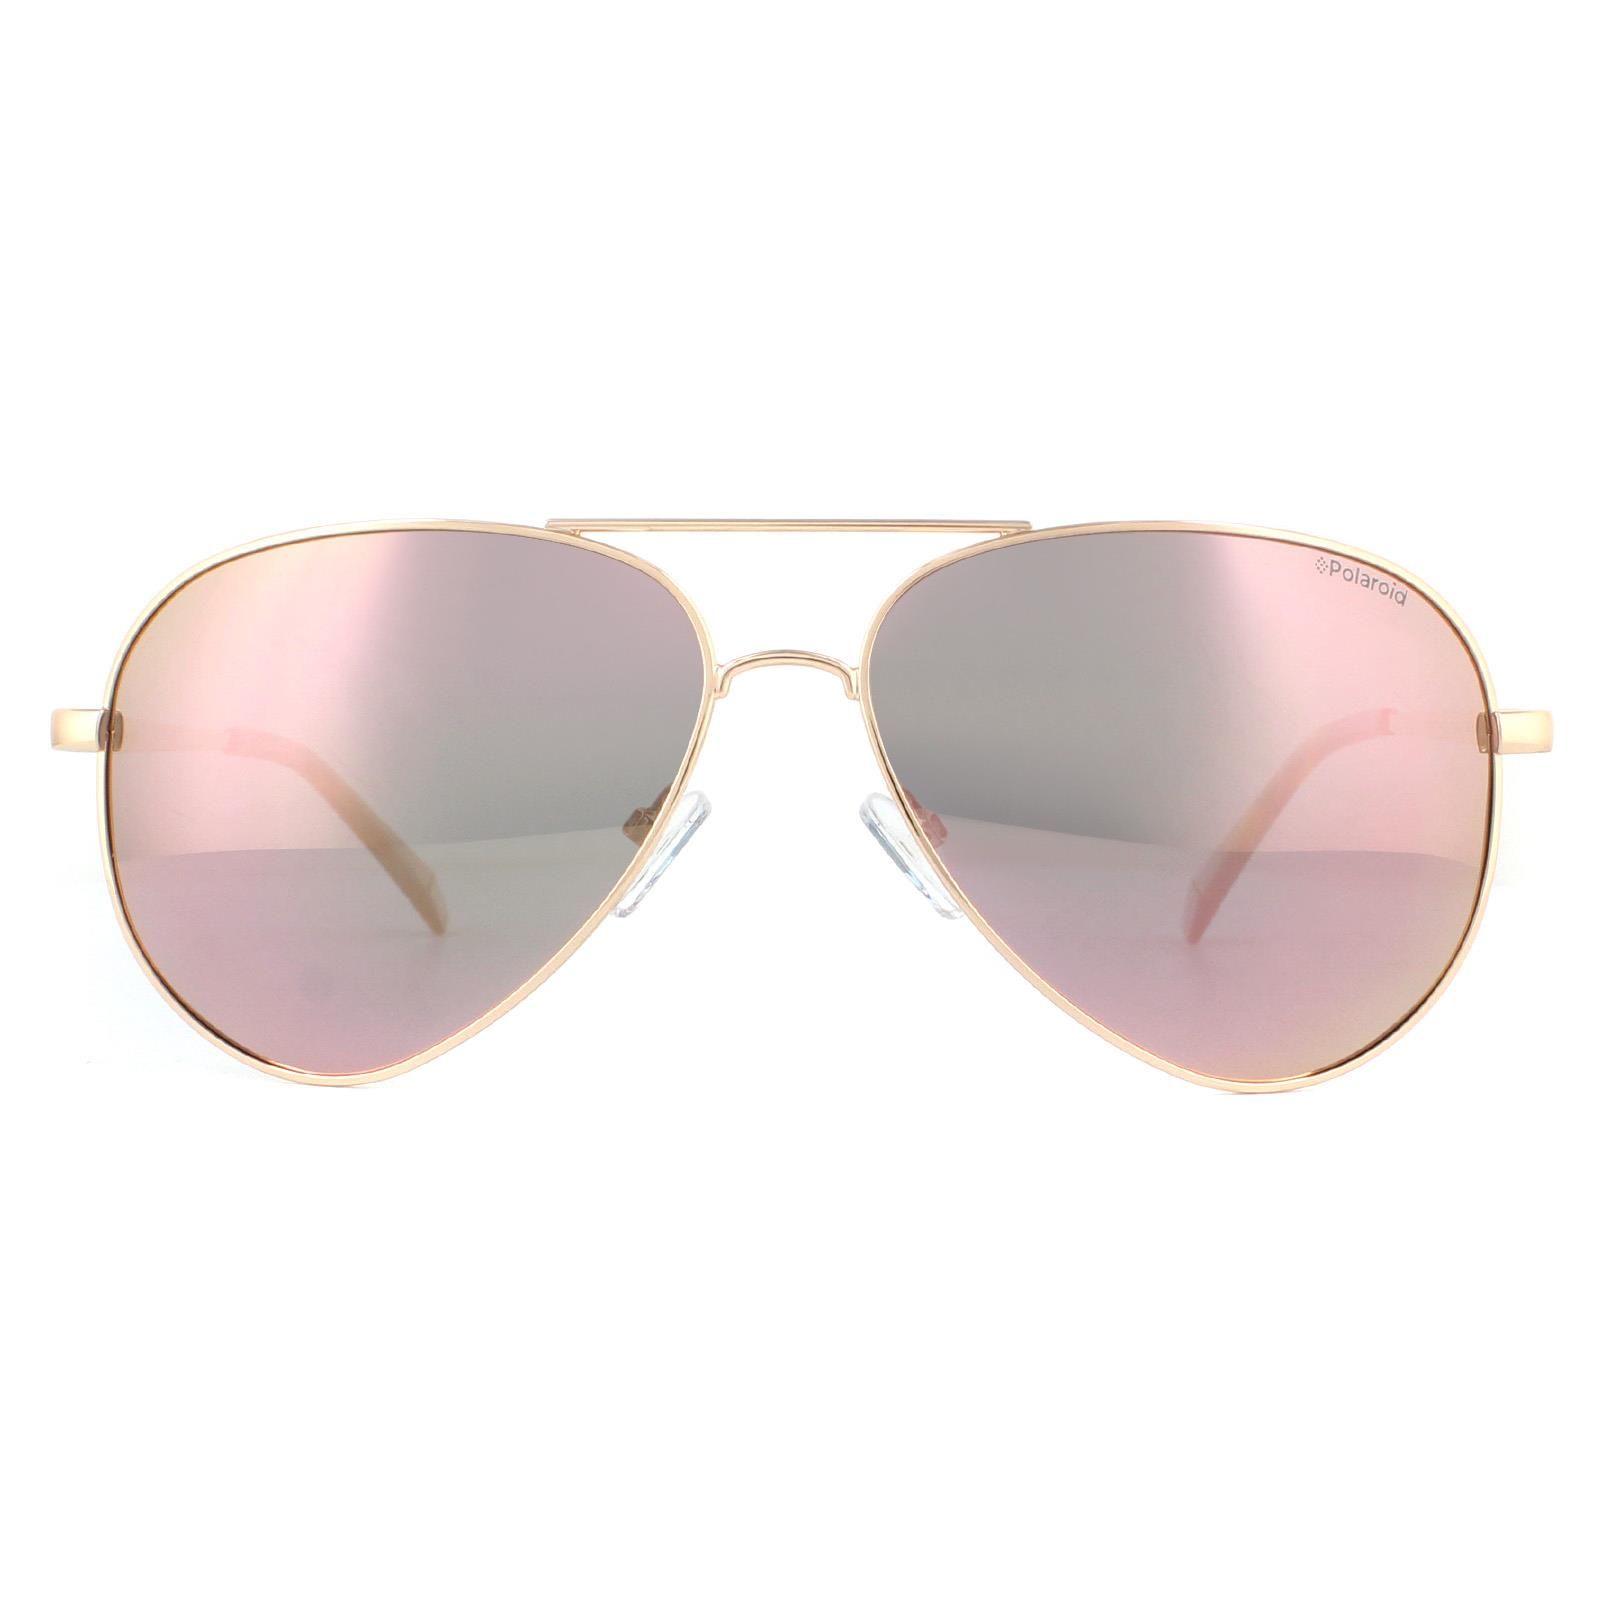 Polaroid Sunglasses PLD 6012/N/NEW DDB JQ Gold Copper Rose Gold Mirror Polarized are a bang up to date bright colour themed model with coloured mirrored lenses giving a youthful look to the classic aviator style. The lenses all still have the superb Polaroid Ultrasight polarized lenses for glare reduction and comfortable all day clarity.